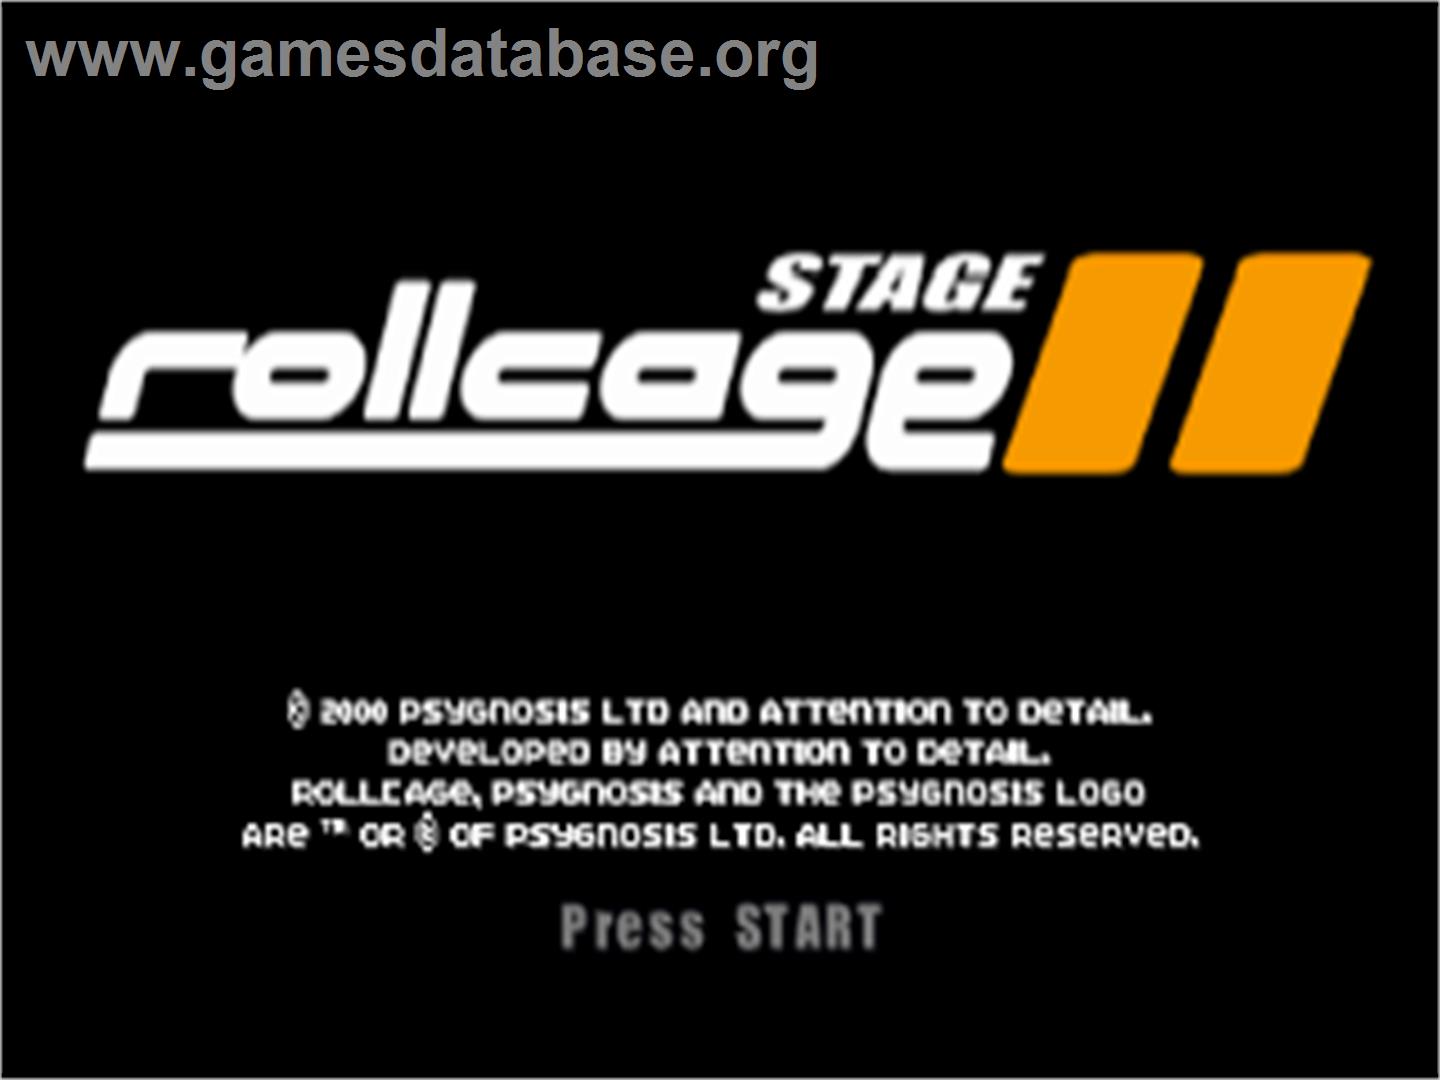 Rollcage: Limited Edition - Sony Playstation - Artwork - Title Screen